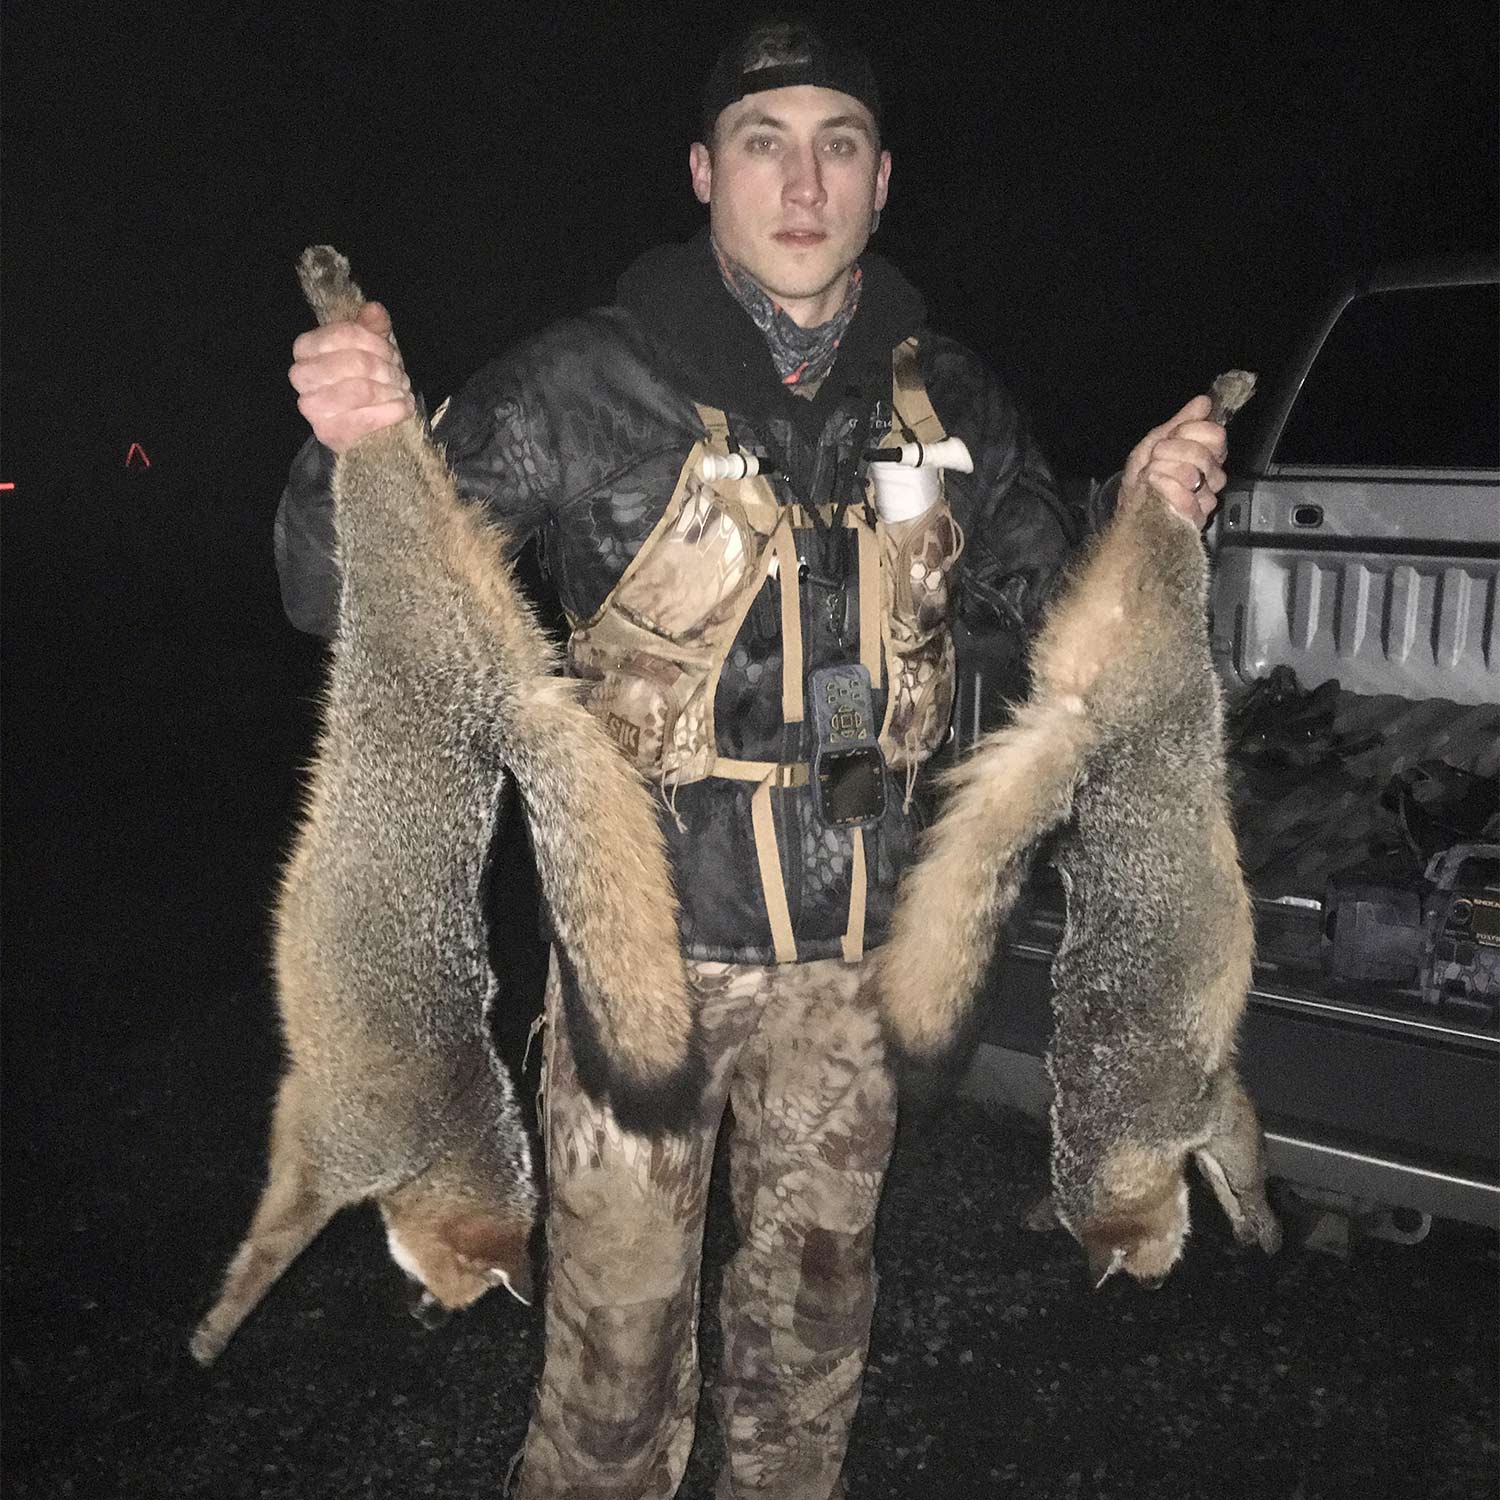 A man in hunting gear holds up two grey foxes at night.